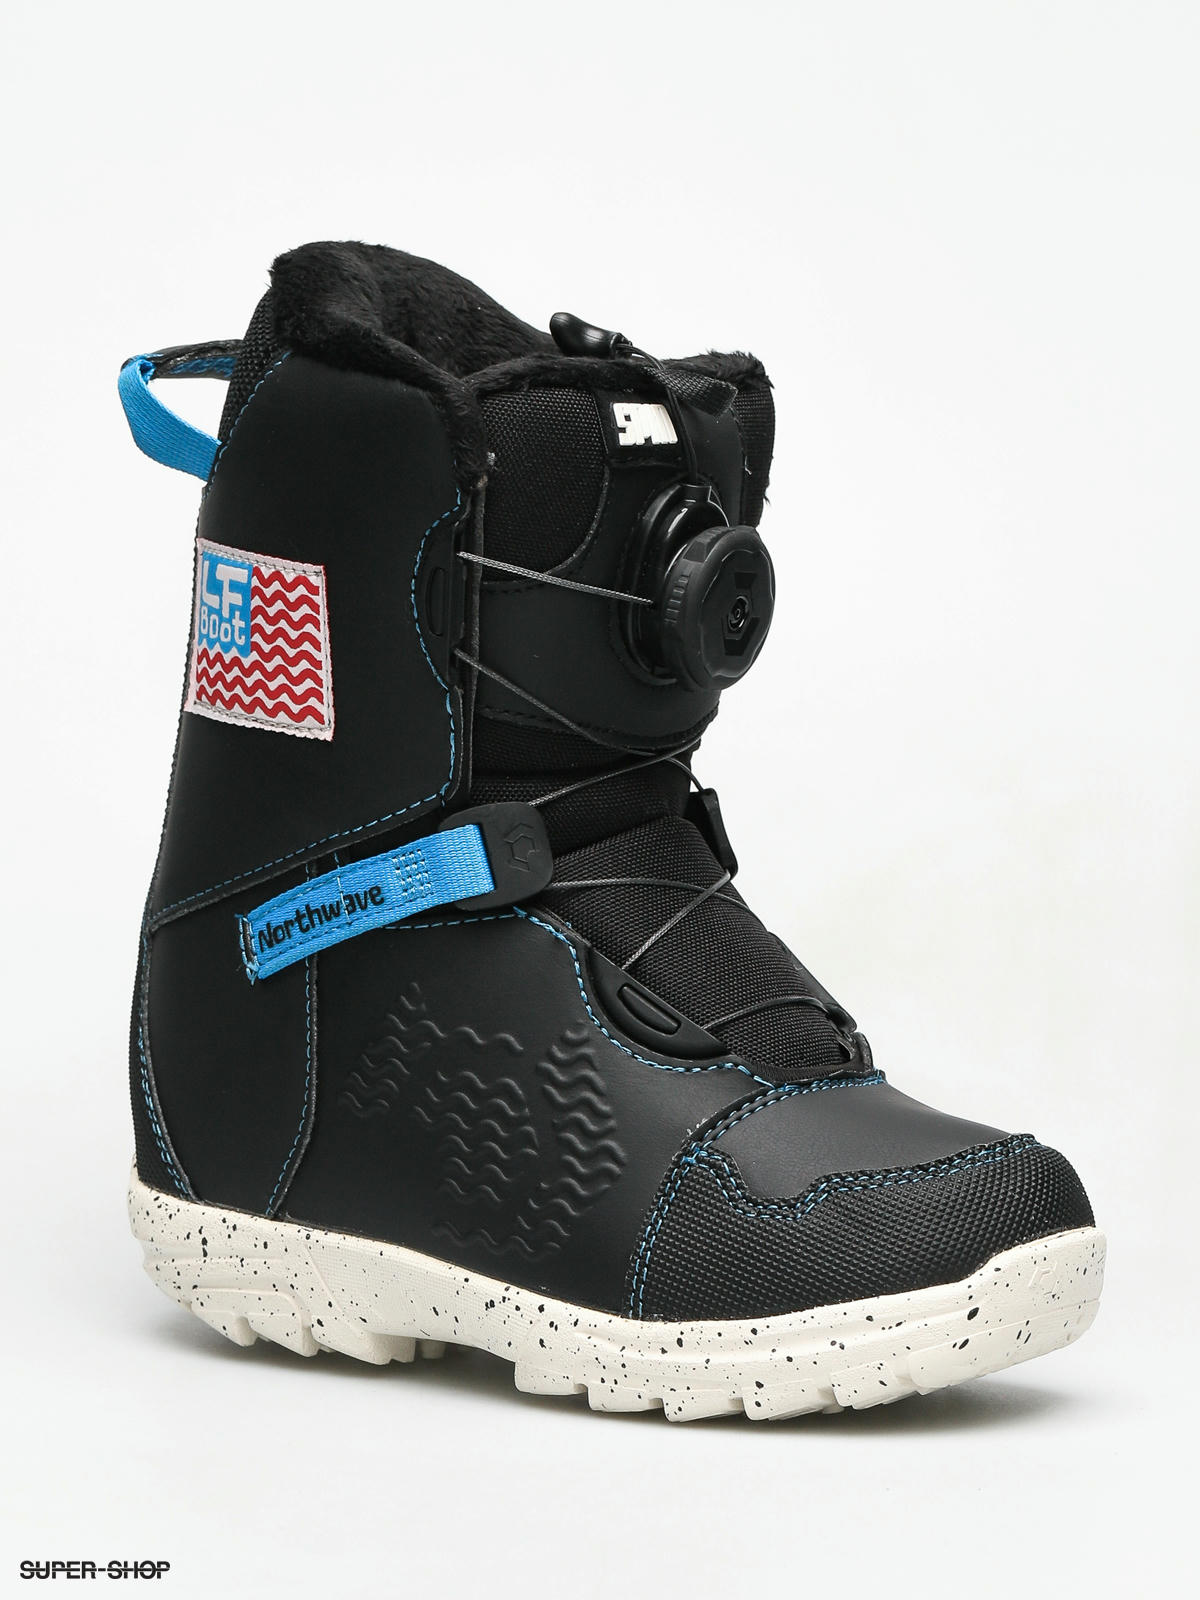 Northwave Snowboard Boots Size Chart